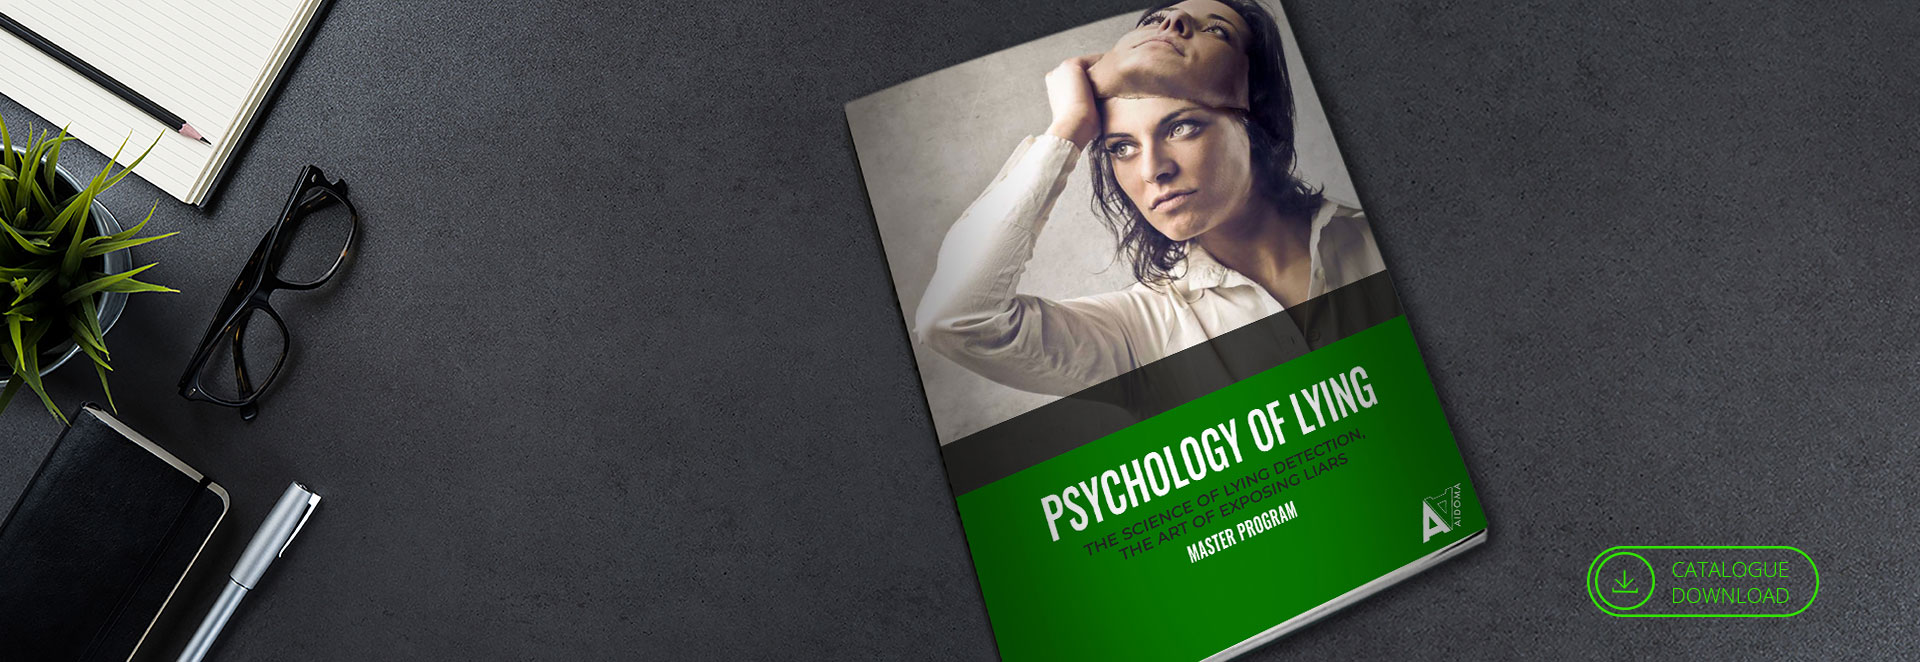 Psychology of lying - The science of lying detection, the art of exposing liars